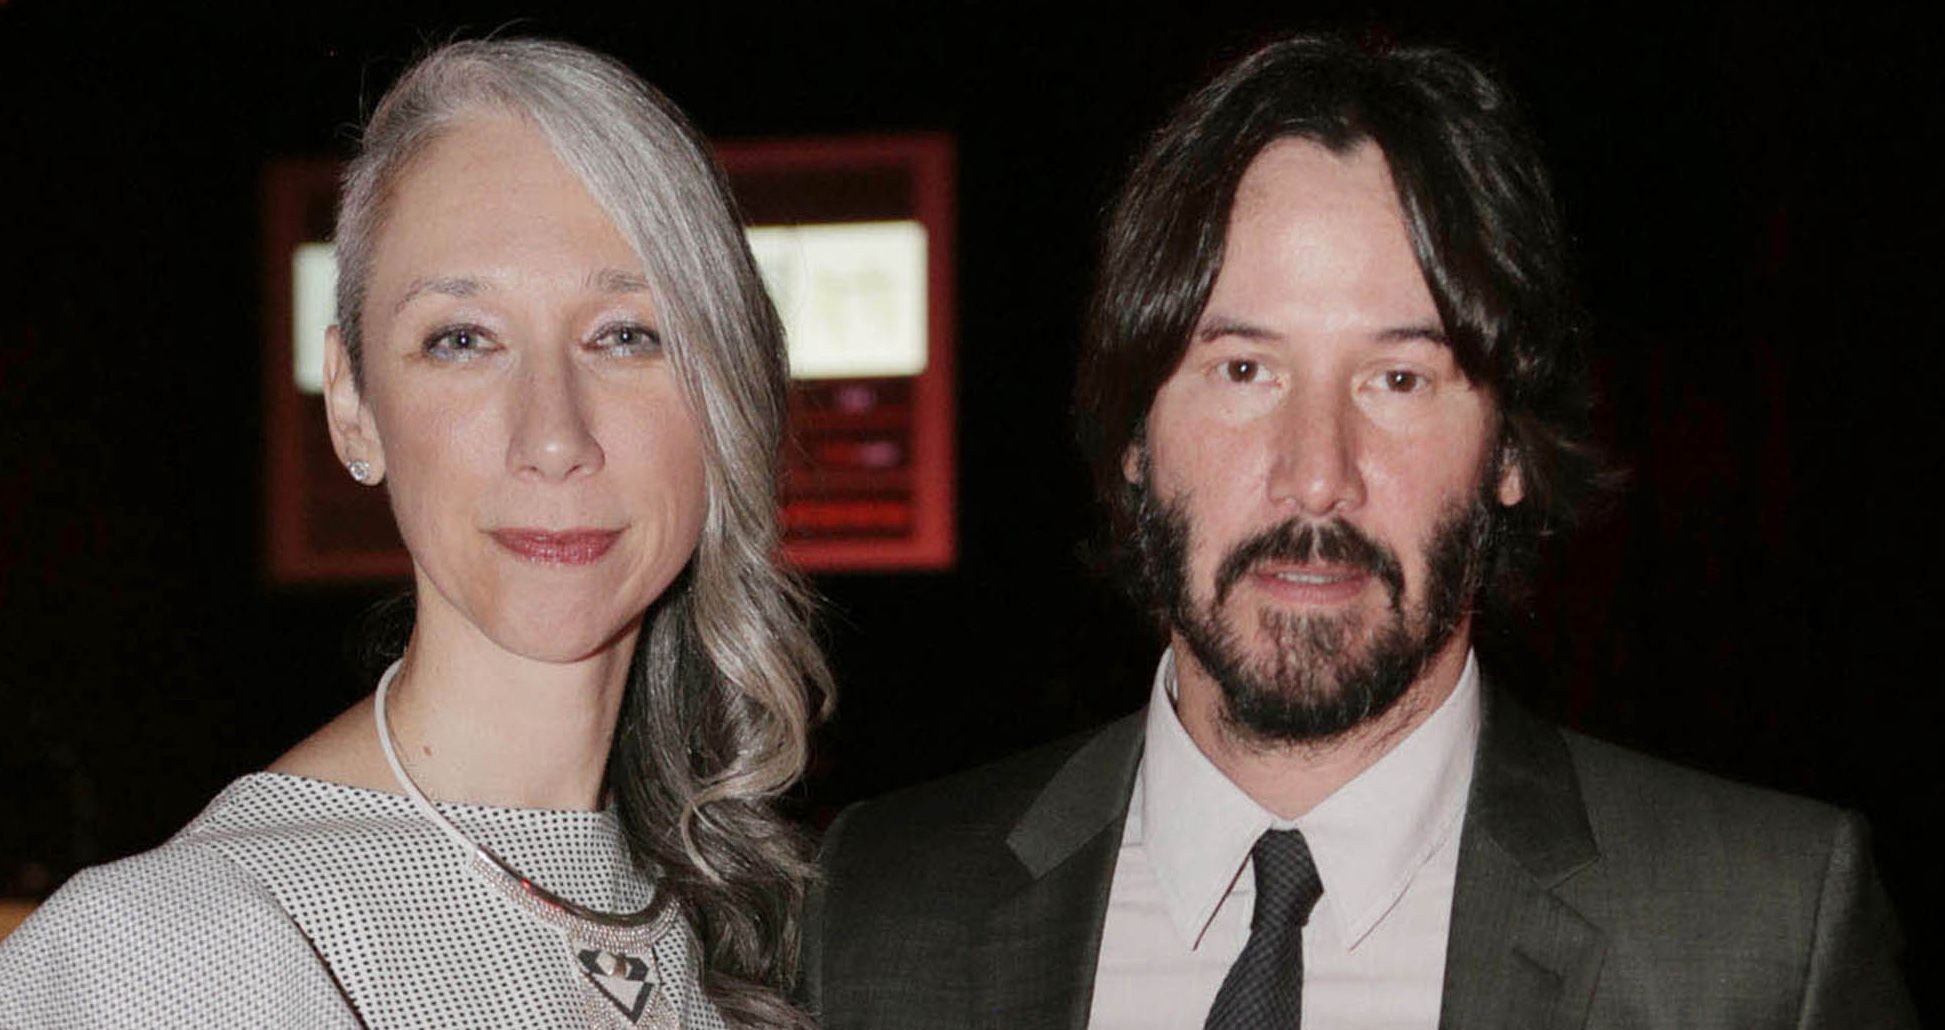 Jay Leno Acted As Keanu Reeves' Therapist When He Felt Down About His Love Life After Celebrating His 39th Birthday Alone